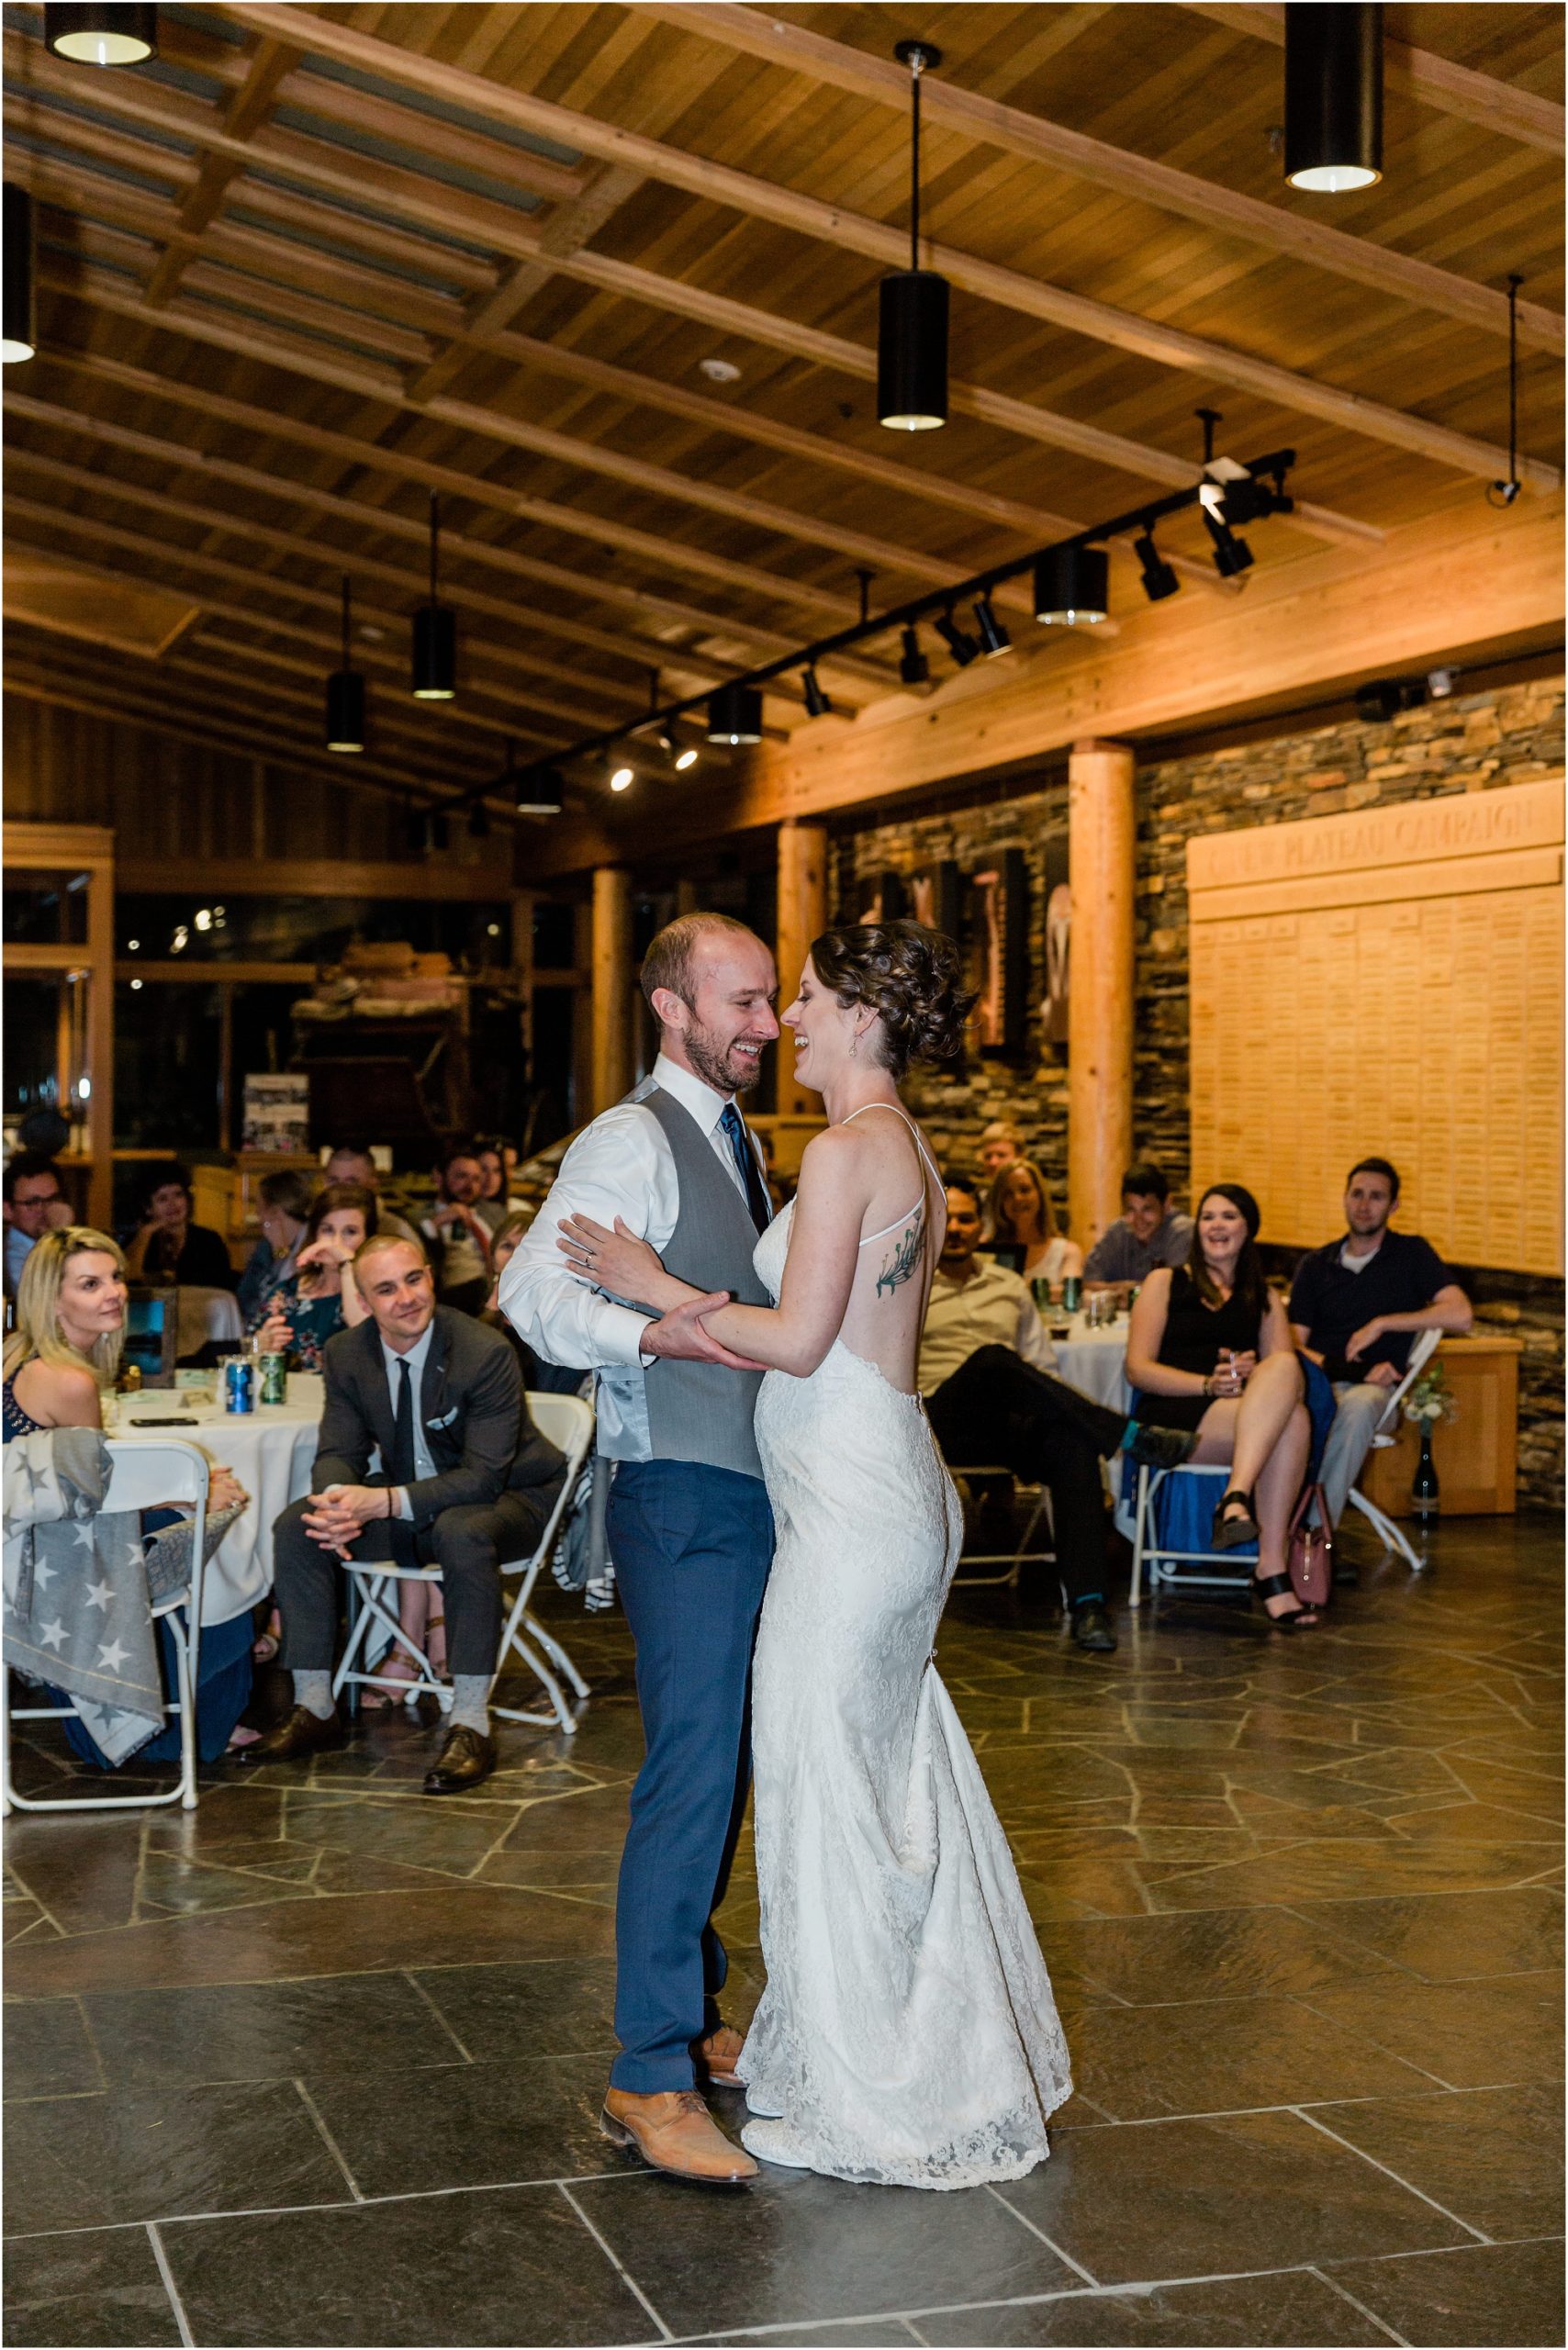 A first dance as a married couple inside the Schnitzer Entrance Hall of the High Desert Museum wedding venue in Bend, OR. | Erica Swantek Photography